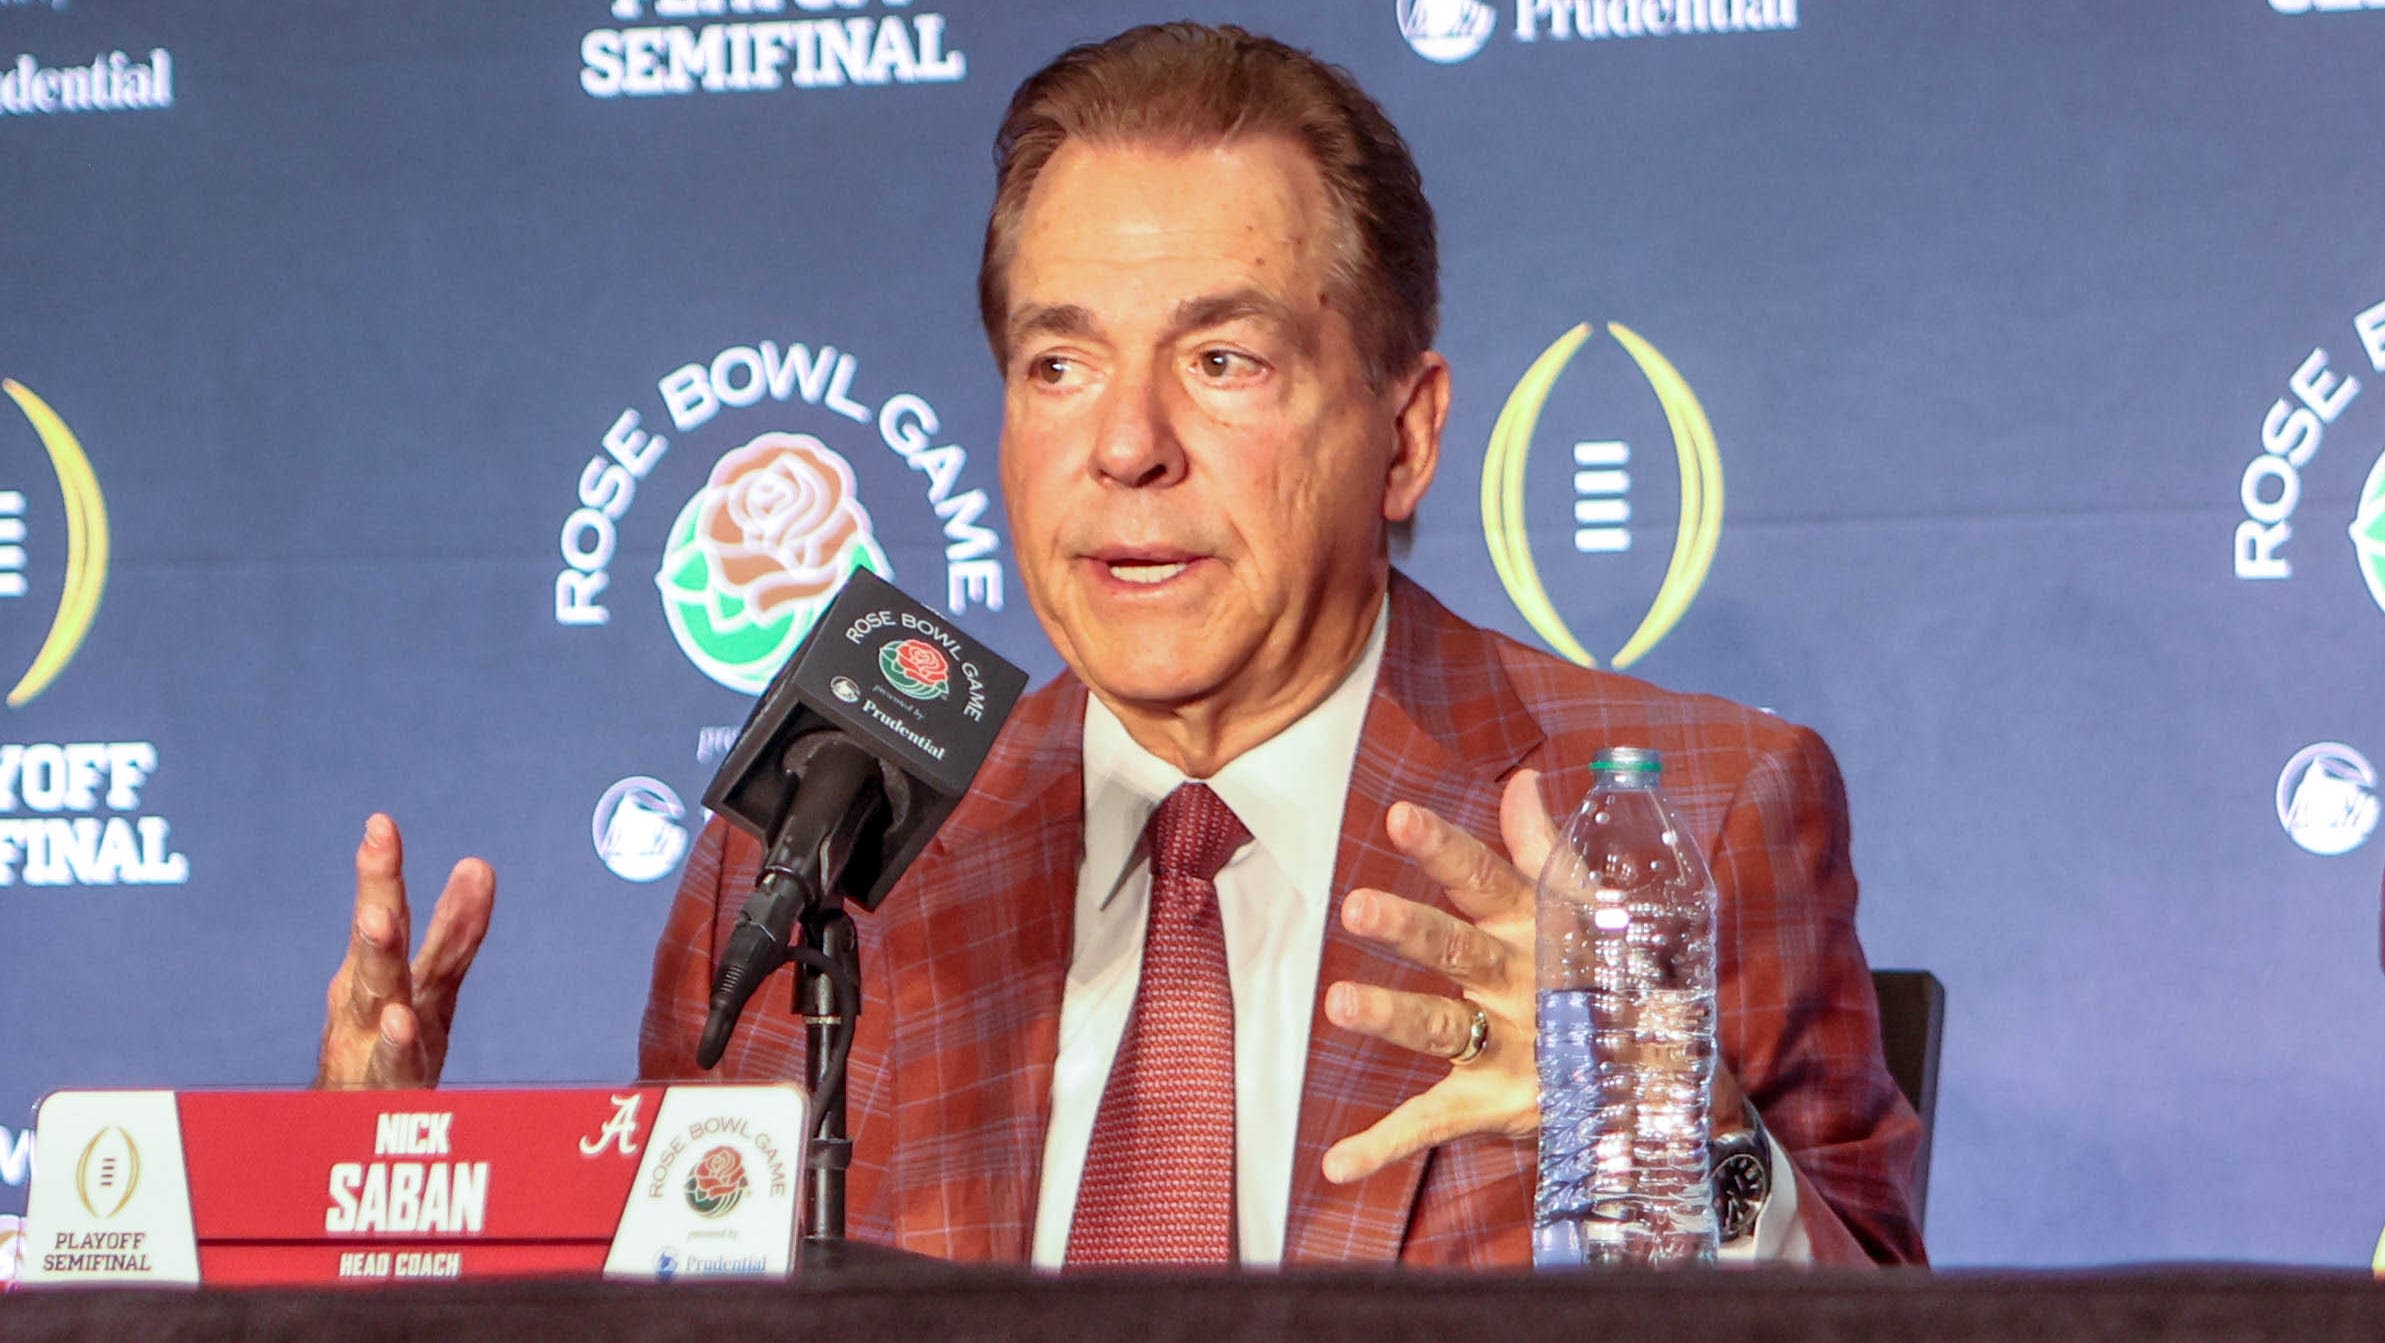 Nick Saban celebrates NFL draft success in first two rounds for Alabama: 'If they would've come back, I would've come back'